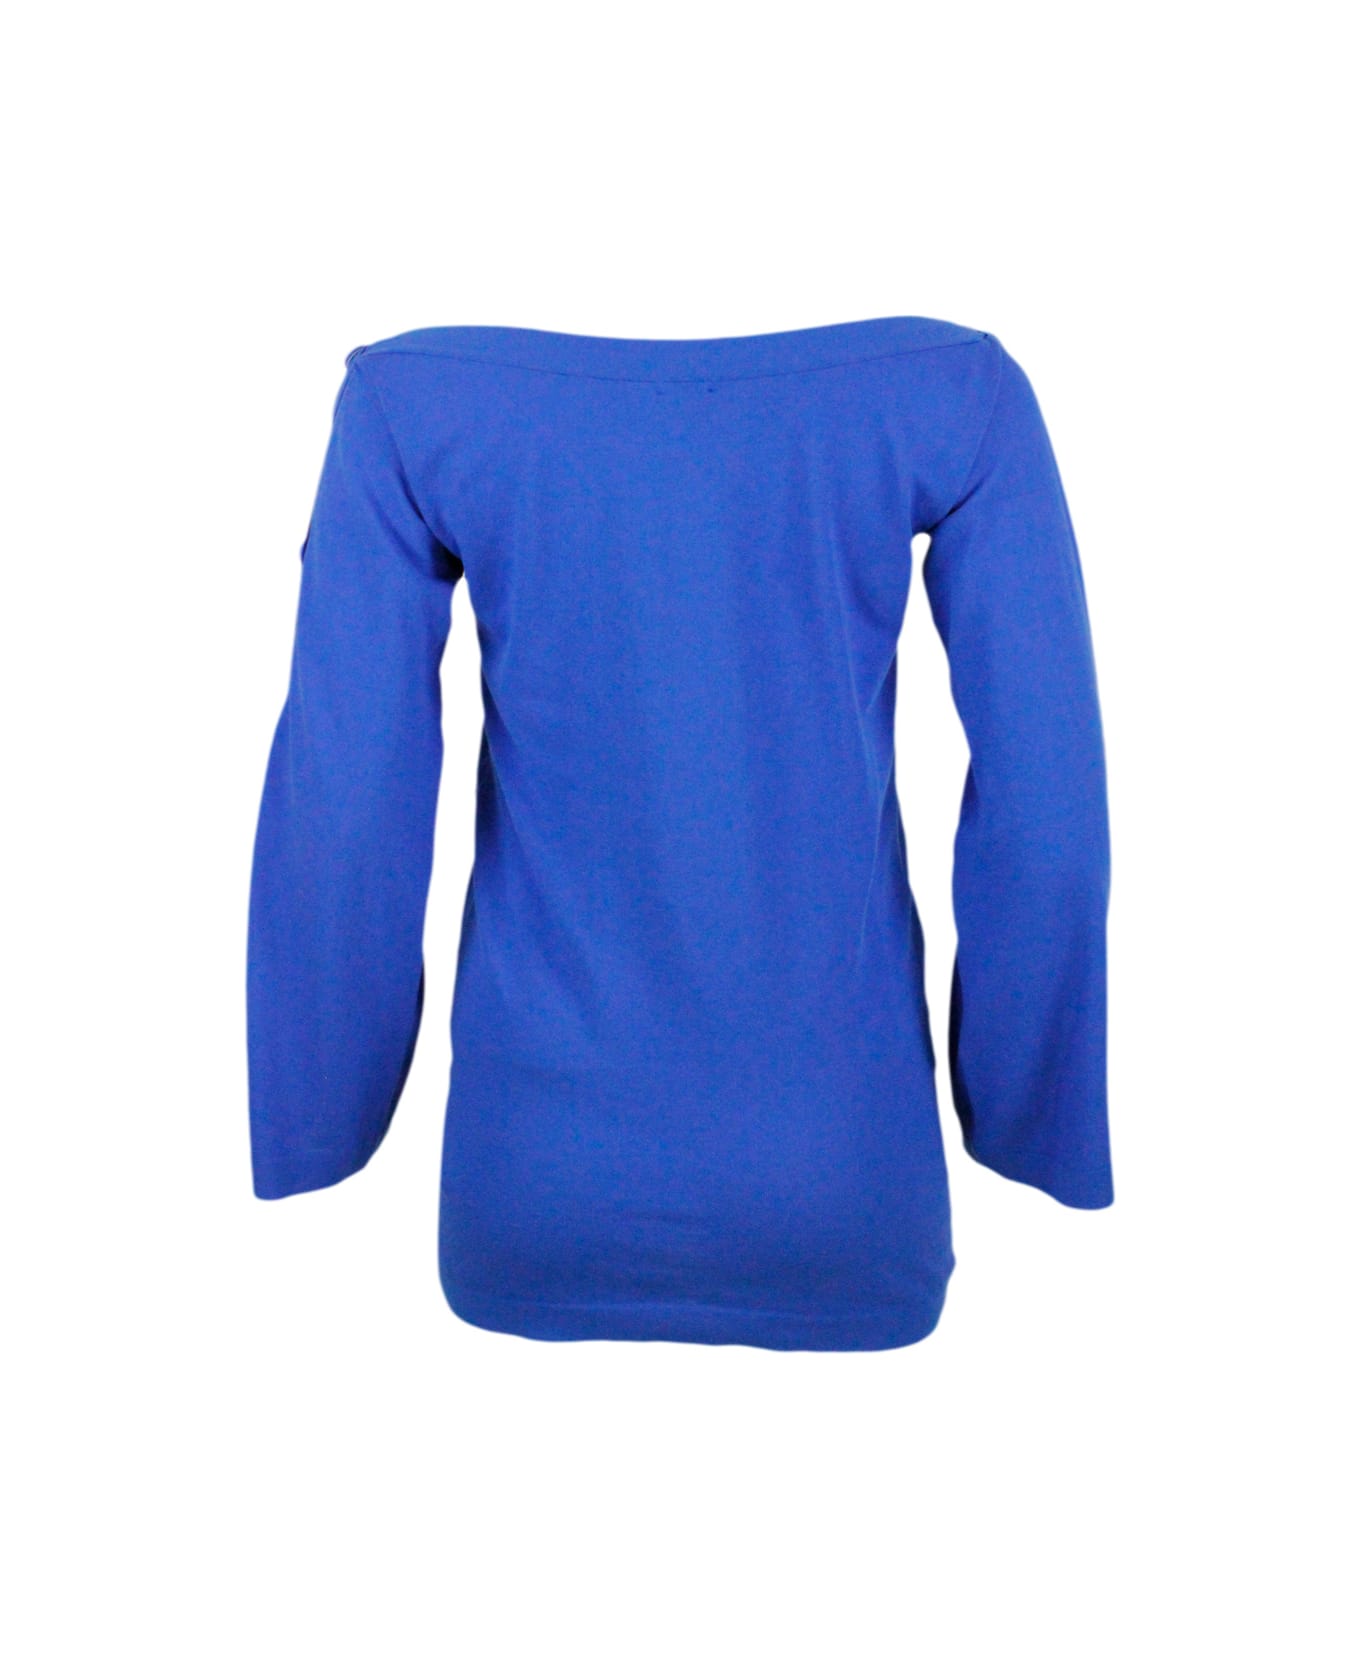 Malo Boat Neck, Long-sleeved Shirt In Cotton Thread With Buttons Along The Arms And Wide Sleeves. - Blu royal